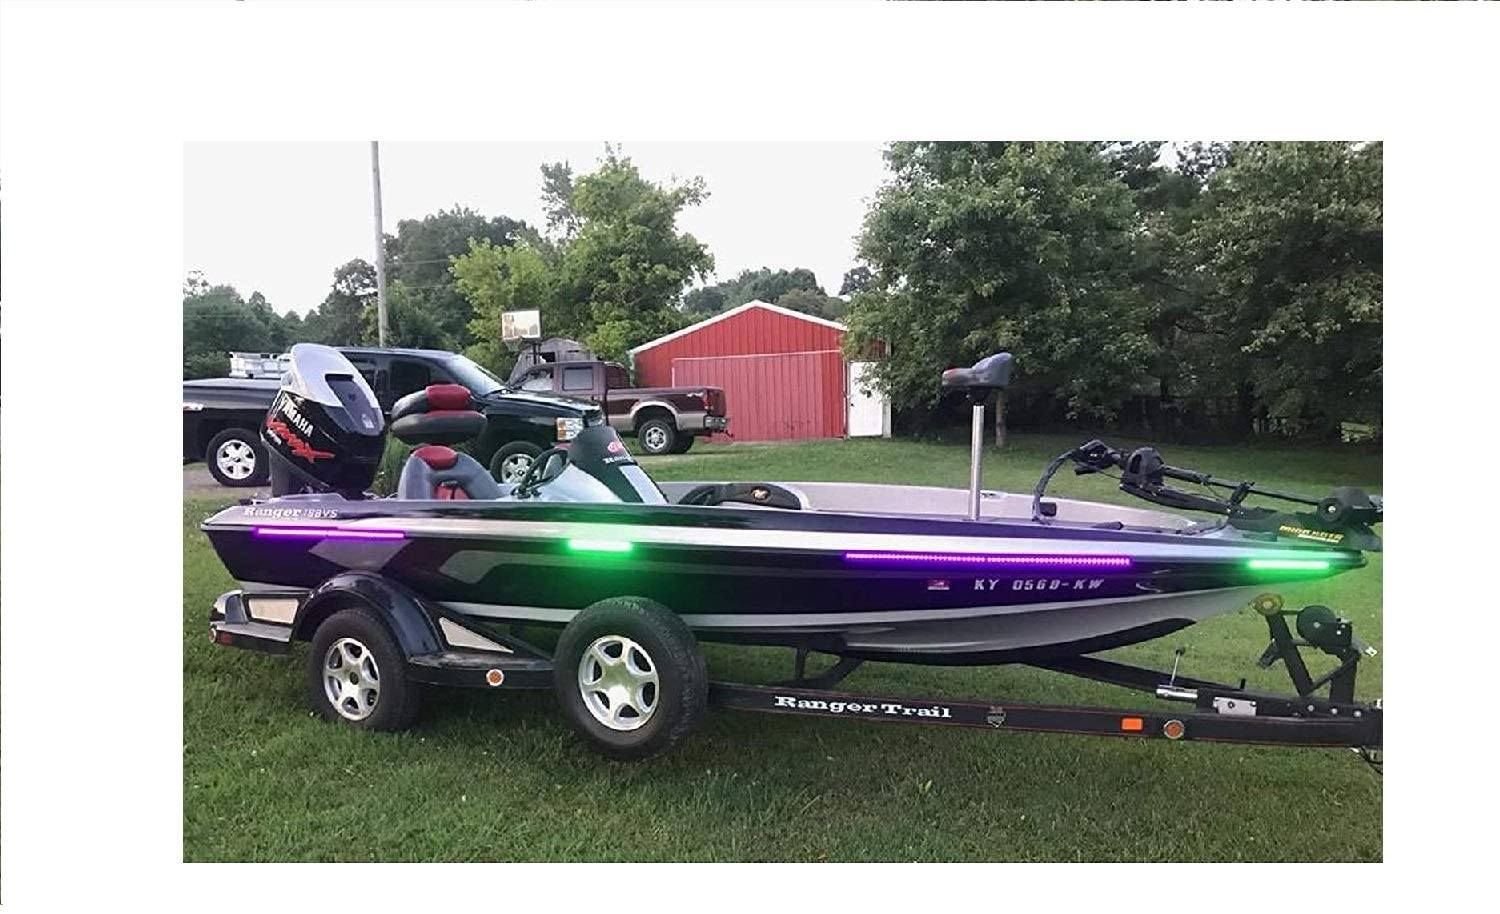 Boat Bow LED Navigation (Stern & Bow) Light Kit, Red, Green, and White Strips for Bass Boats, Waterproof